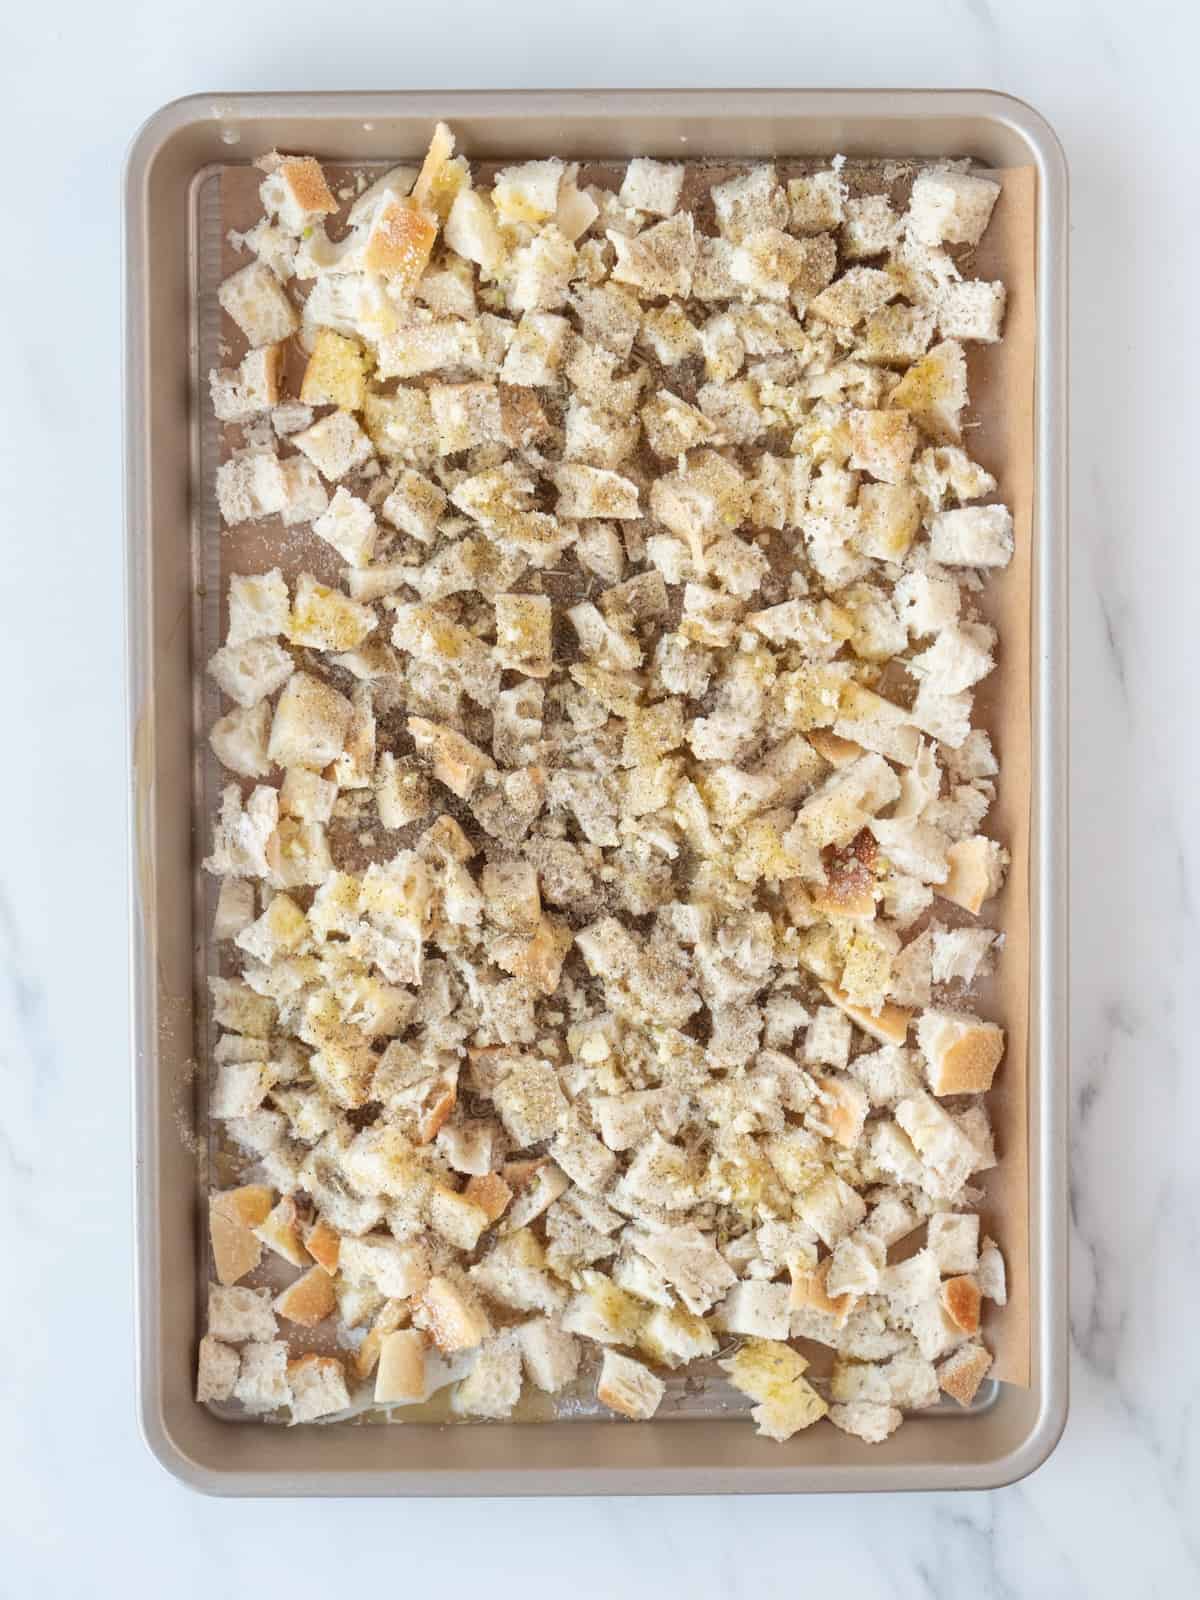 A rectangular parchment paper-lined baking sheet of cubed pieces of bread drizzled with olive oil and sprinkled with garlic, salt, pepper and italian seasoning.